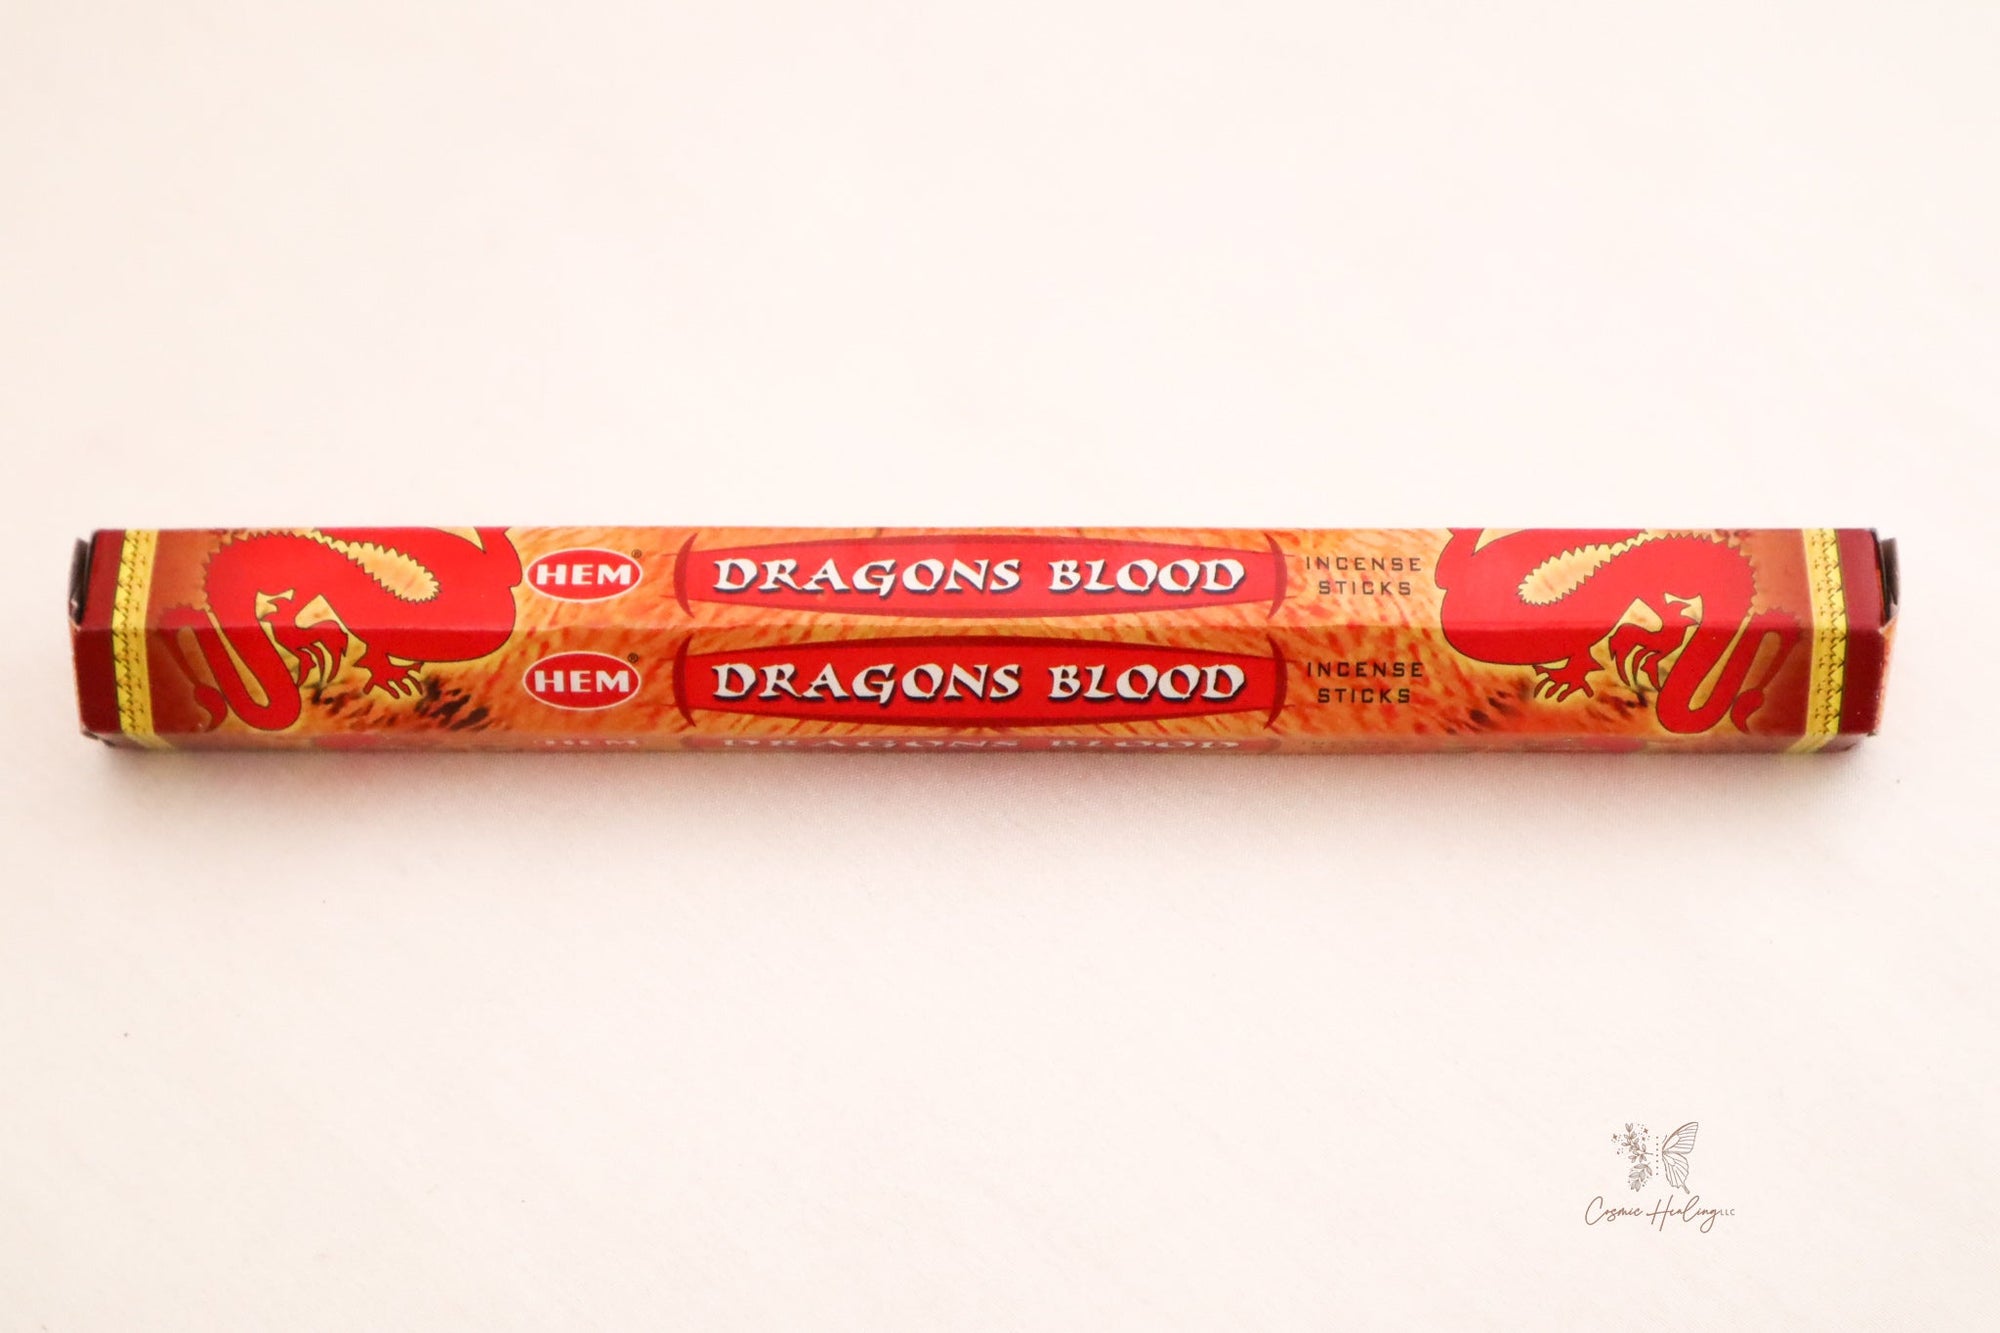 Dragon's Blood Incense, HEM stubborn and long lasting problems, protection, strength, power, and money problems - Shop Cosmic Healing